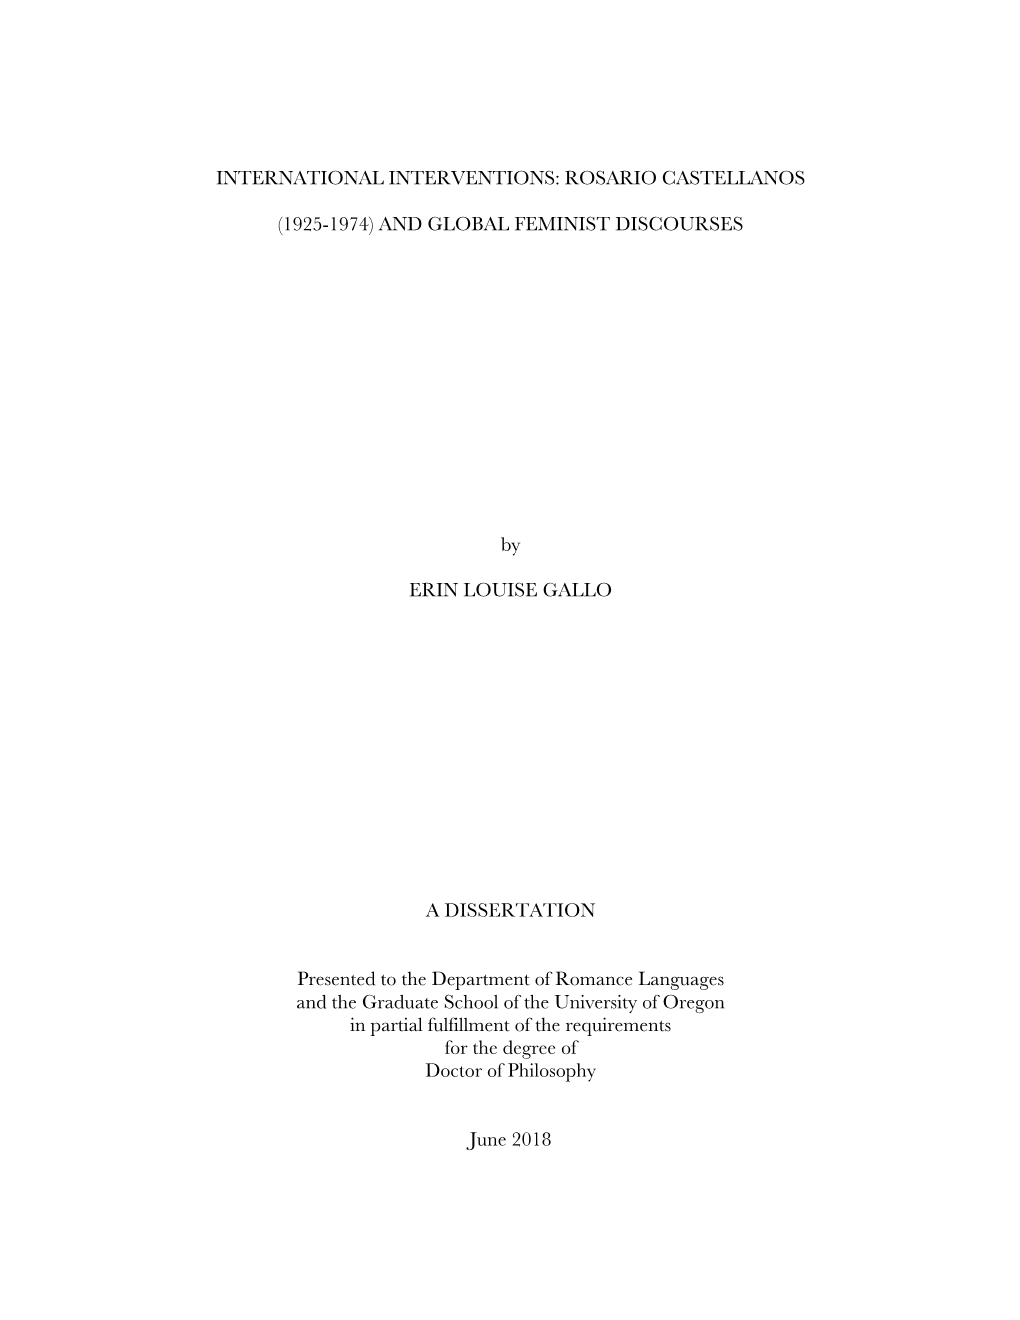 INTERNATIONAL INTERVENTIONS: ROSARIO CASTELLANOS (1925-1974) and GLOBAL FEMINIST DISCOURSES by ERIN LOUISE GALLO a DISSERTATION